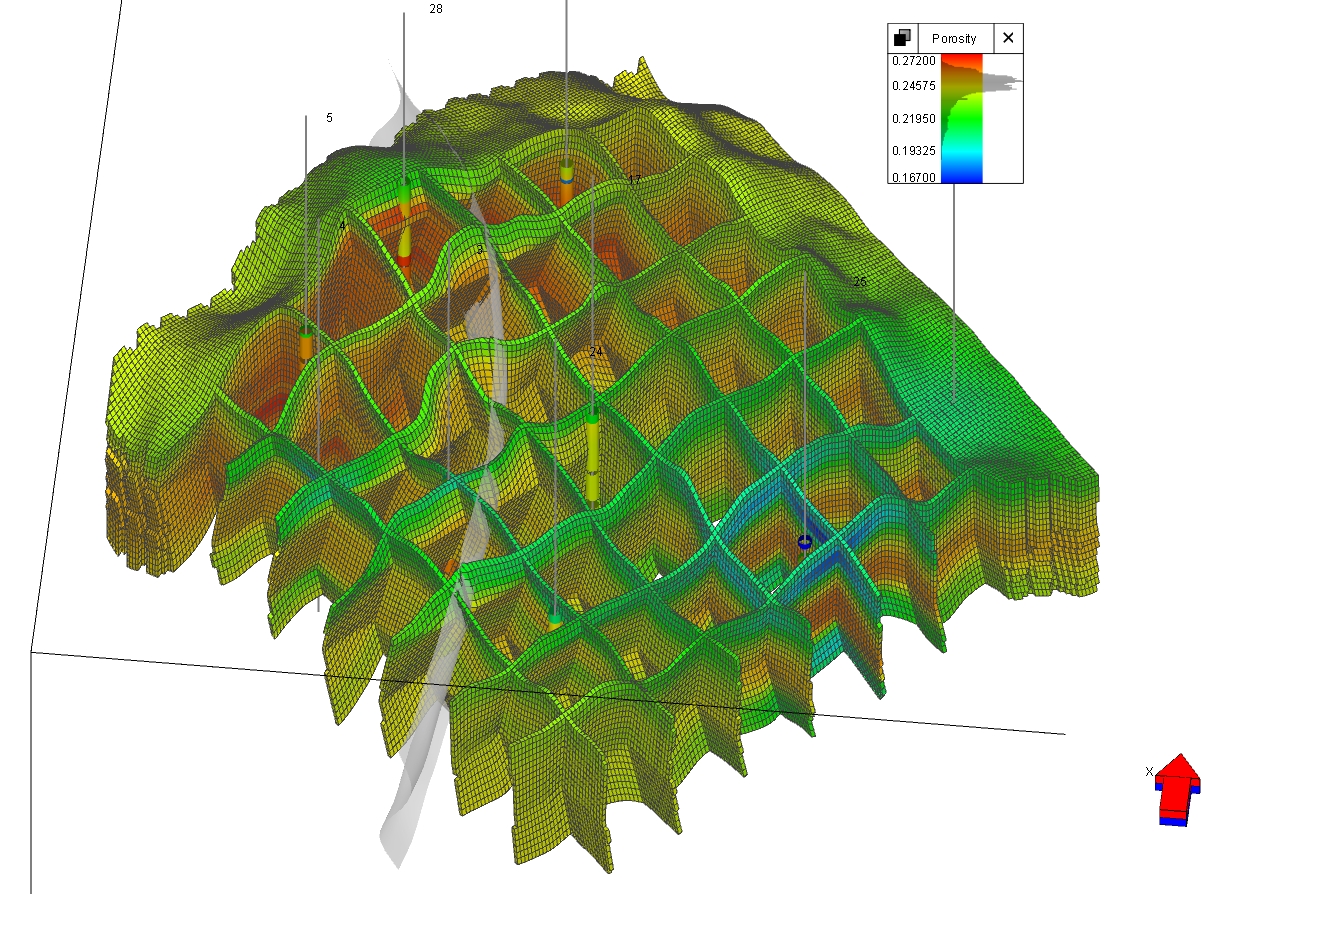 tNavigator shows a cutaway view of a porosity model that was generated using geostatistics. (Source: Rock Flow Dynamics)